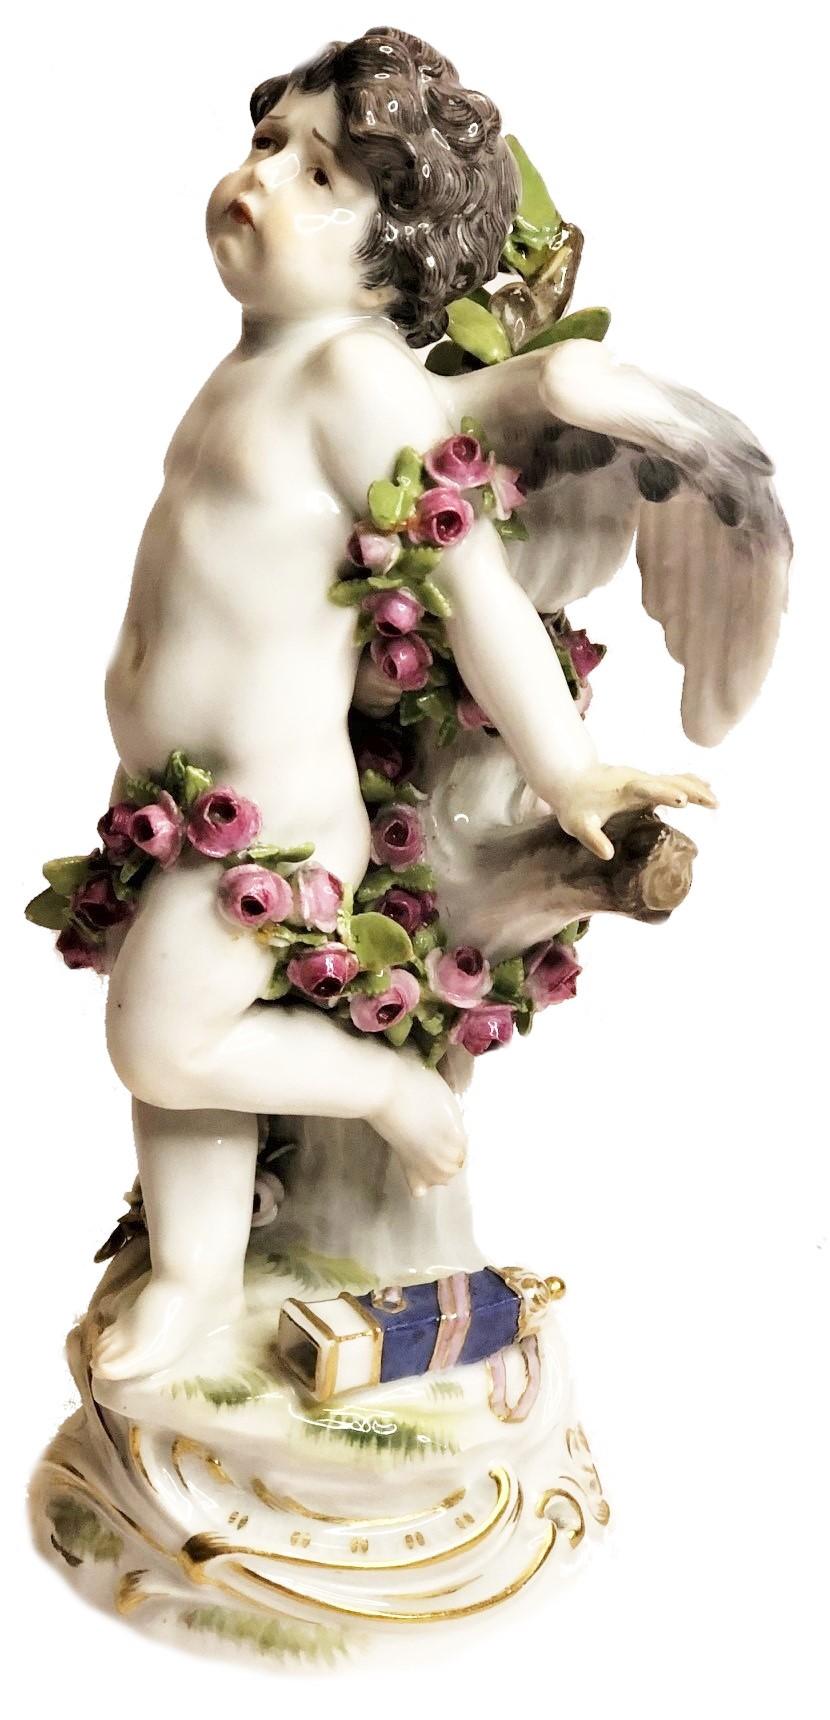 Executed in the best traditions of Meissen, this exceptionally fine statuette depicts a cupid with a suffering expression on his face and an empty quiver of arrows at his feet. This composition instantly evokes an unambiguous emotion in the viewer –